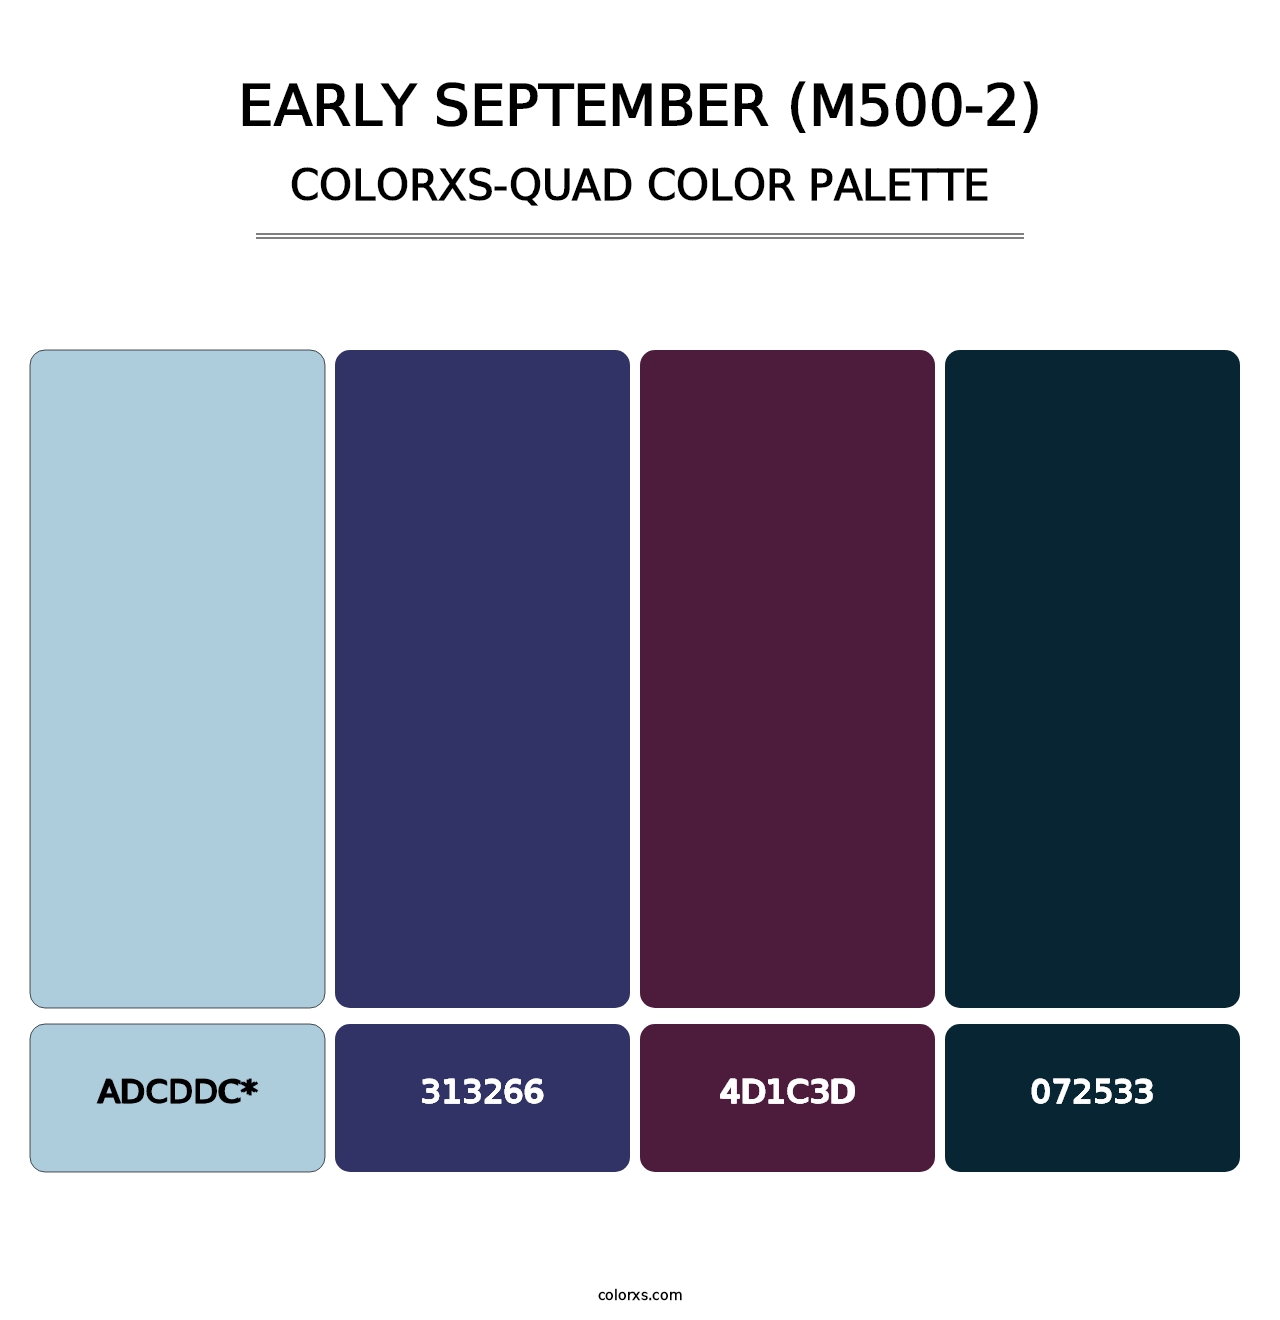 Early September (M500-2) - Colorxs Quad Palette